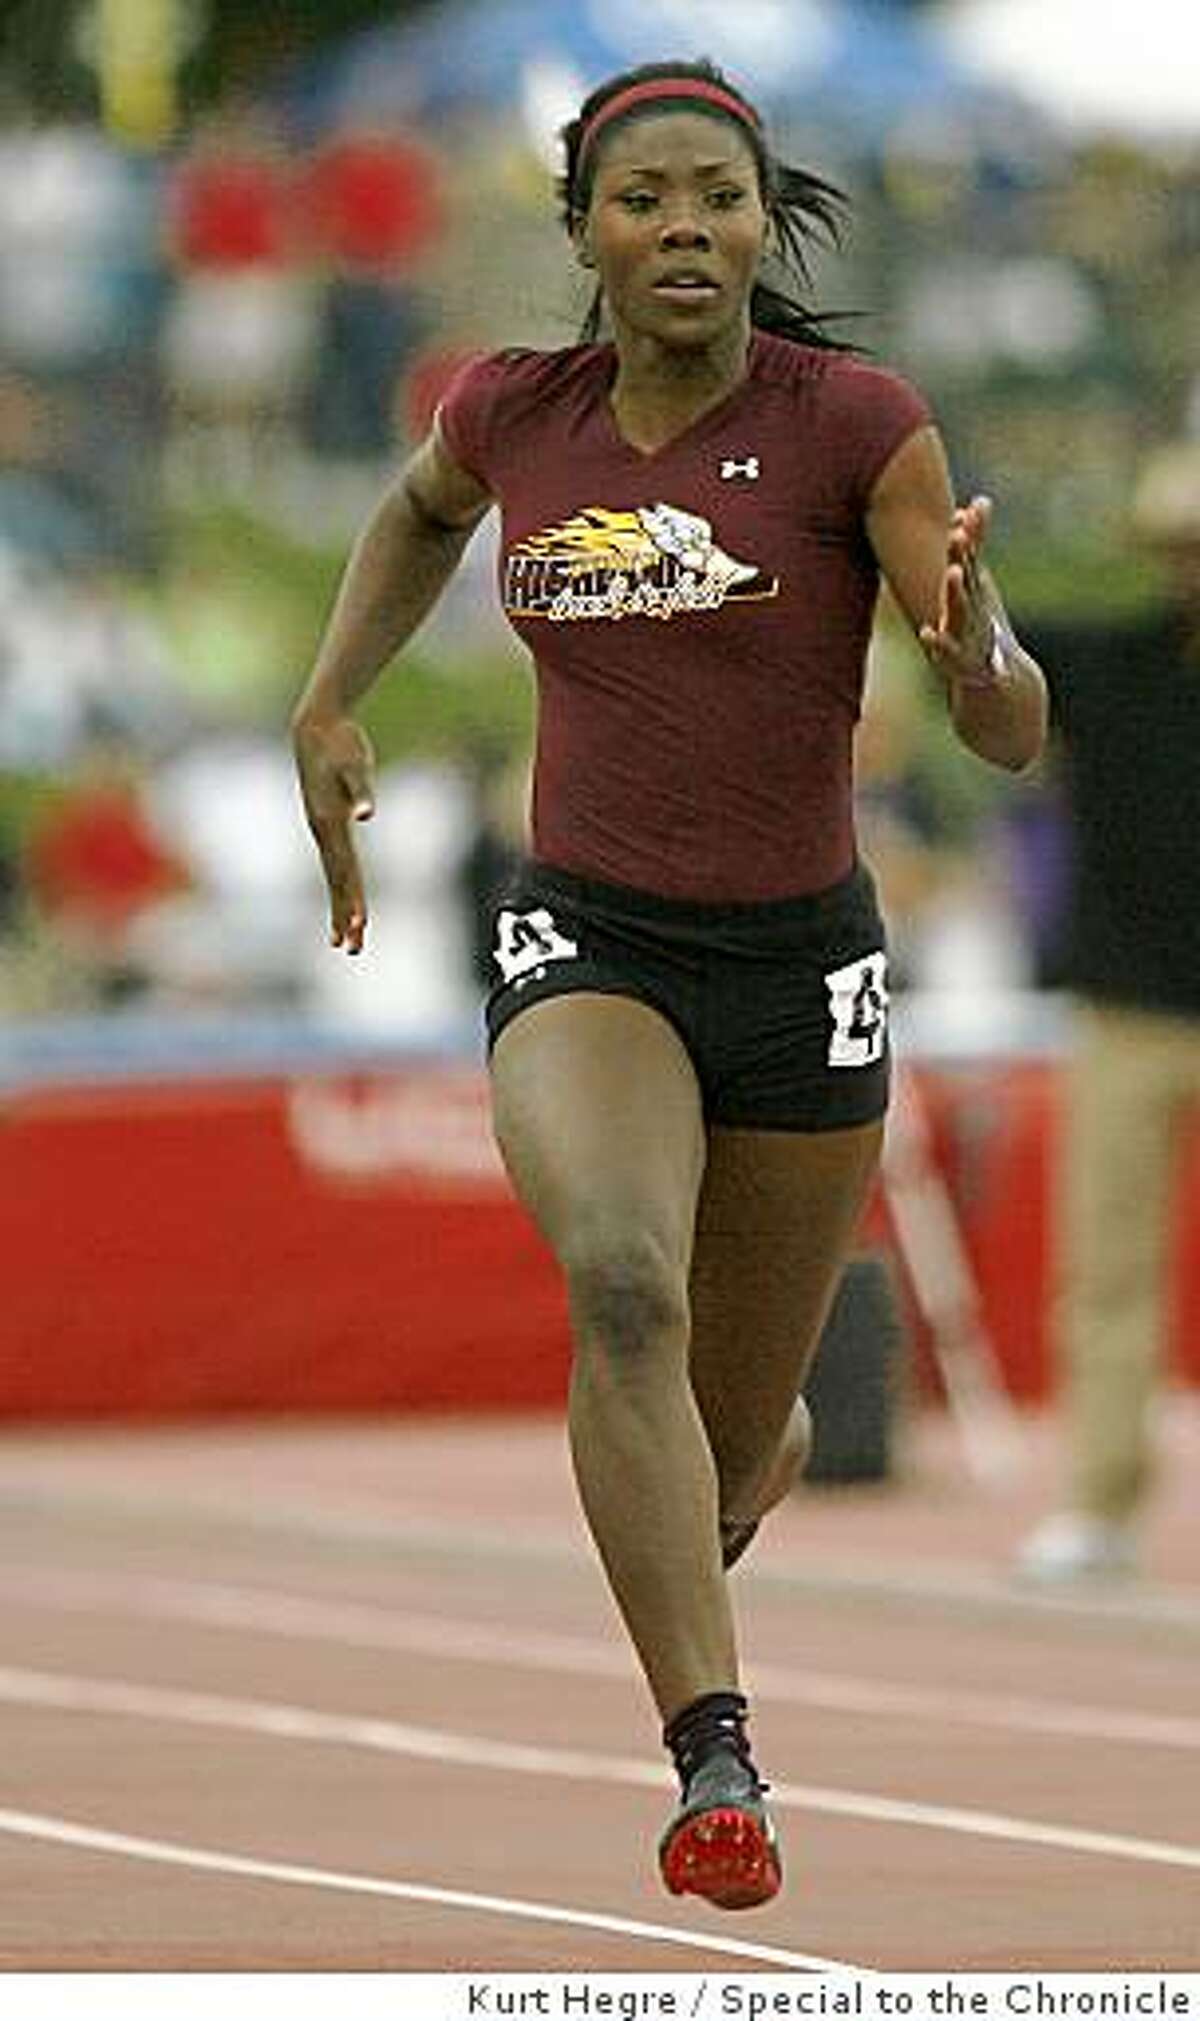 Ashton Purvis of St. Elizebeth sprints for the finish line in her heat of the 100 meter race Friday May 5,2009 at the State Track and Field Championships in Clovis .Ca. Purvis false started once and in the second attempt did not qualify for the finals Saturday.